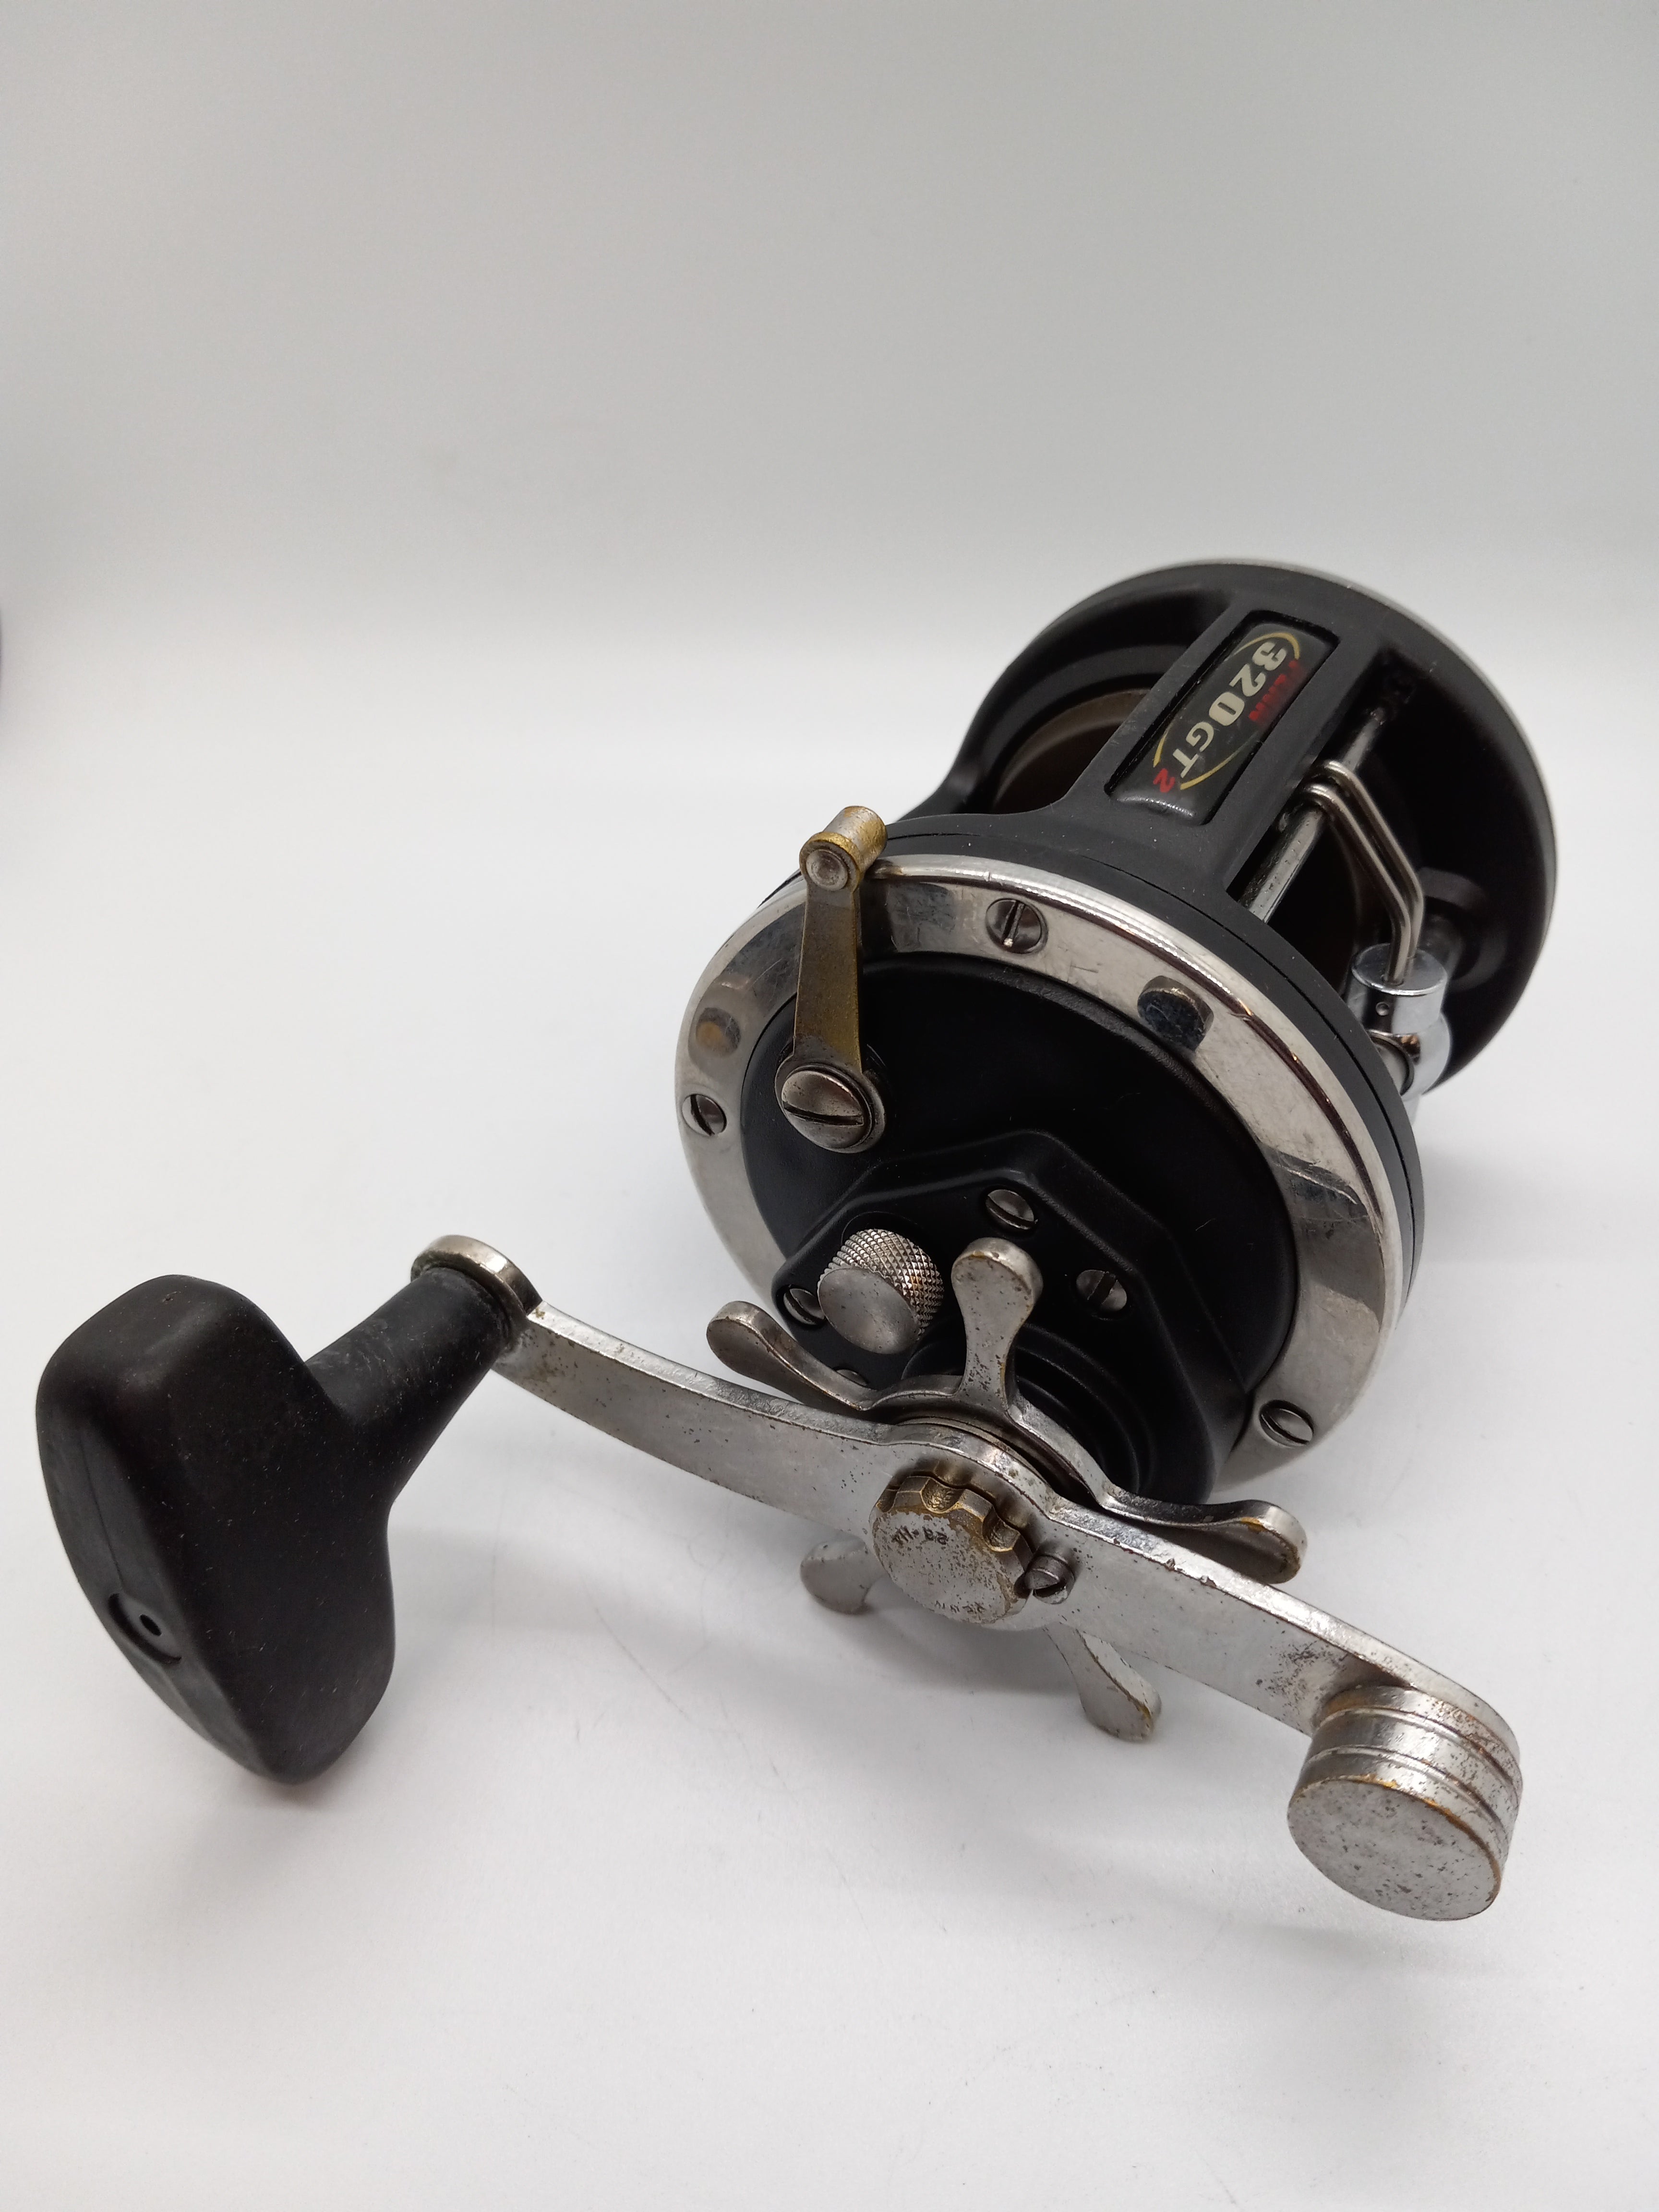 wholesale discount price Penn 320 GTI Graphite Level Wind Fishing Reel High  Speed Made In The USA VTG